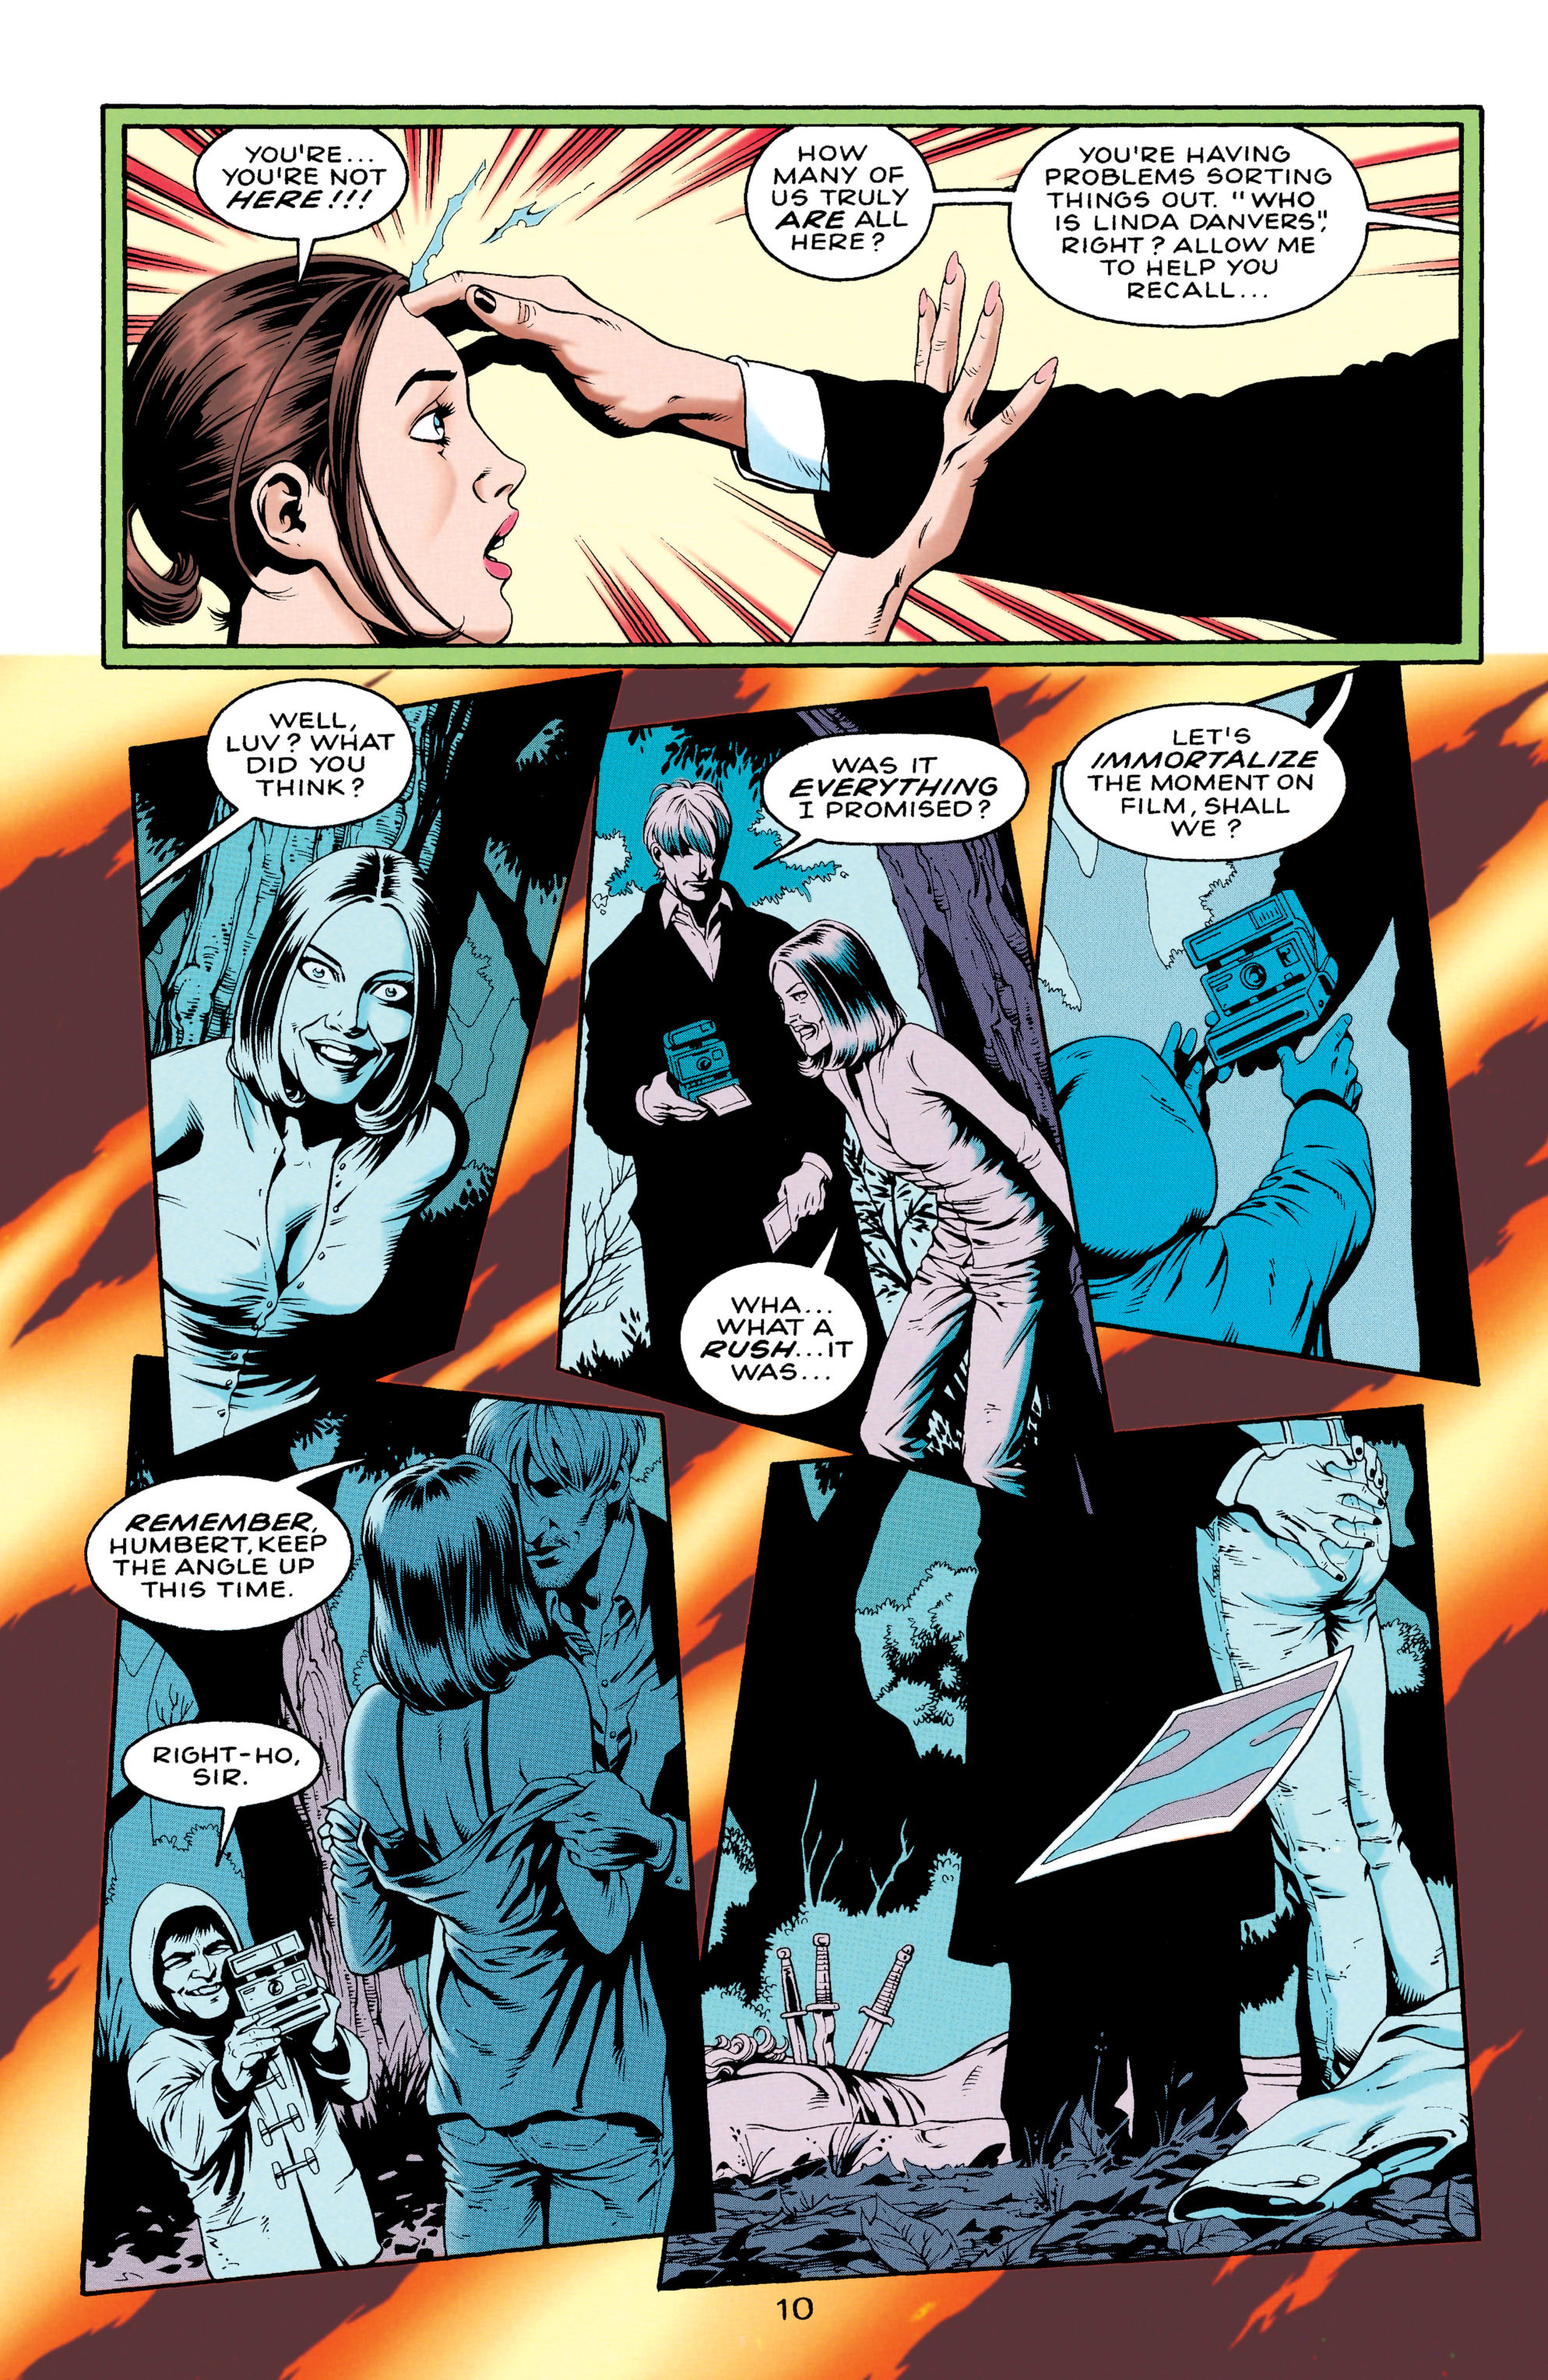 Supergirl (1996) 2 Page 10